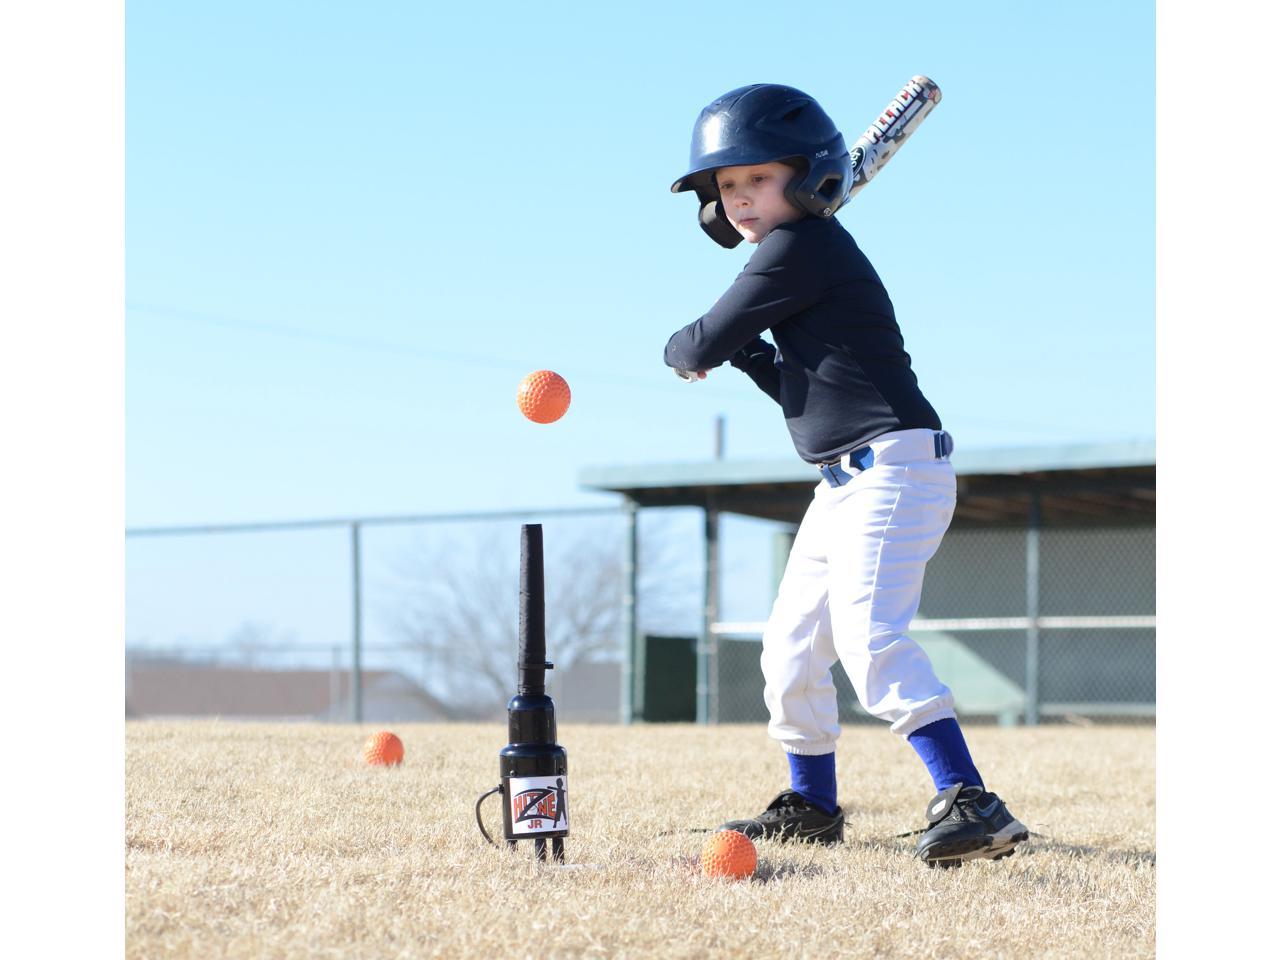 Hit Zone Jr Baseball & Softball Air Powered Batting Tee Combo! The Ball  Floats In Mid Air Creating A Unique Training Aid! Includes 14 Dimpled  Training 